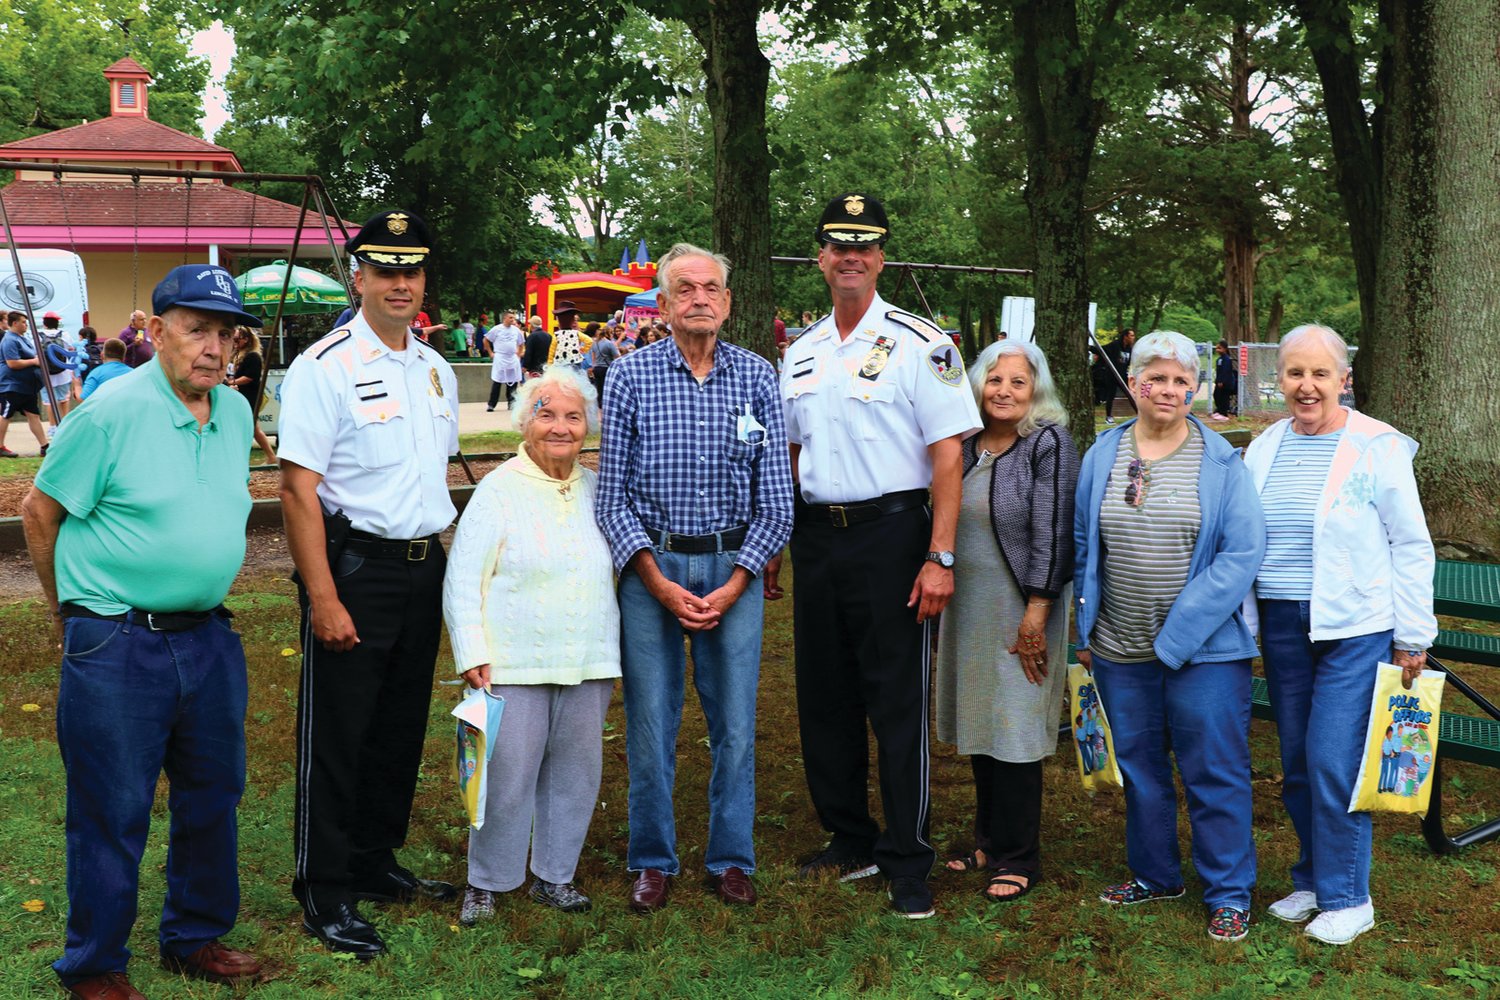 SUPPORTING SENIORS: The Johnston Police Department prides itself in interacting with the senior citizen population in town whose residents (above) were among the many people who enjoyed the recent “community cookout” — a.k.a. National Night Out inside War Memorial Park.